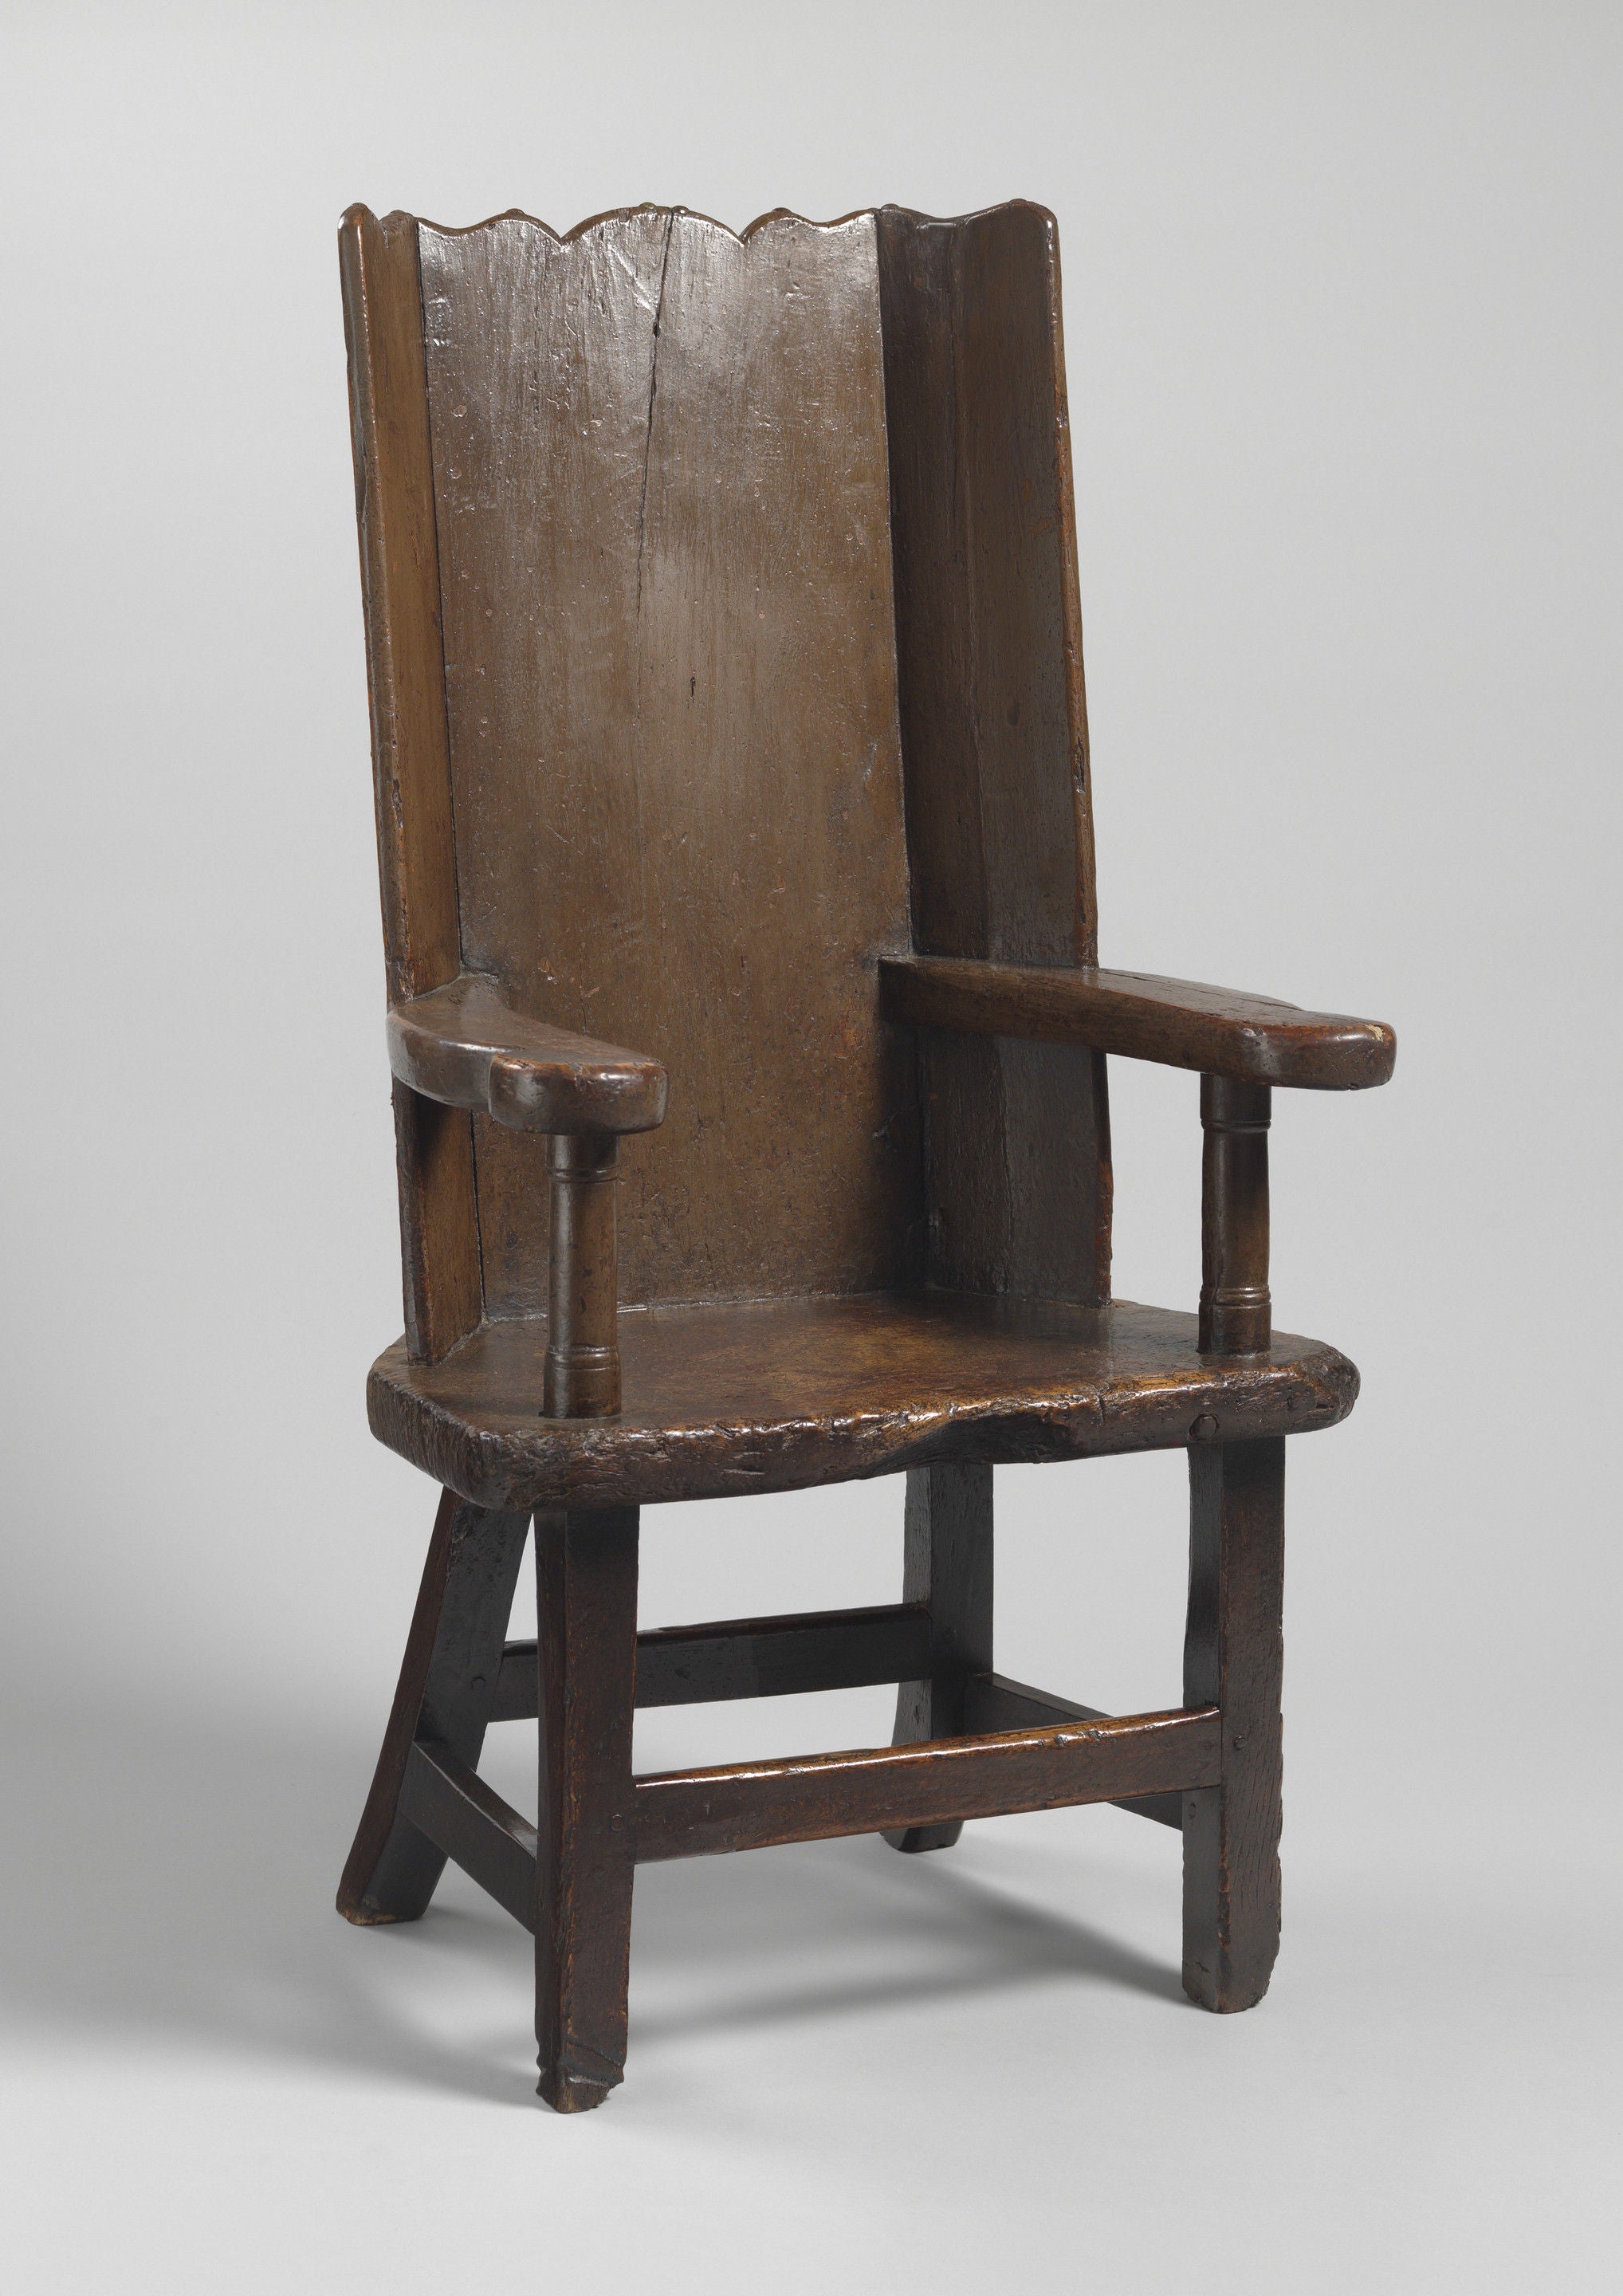 Imposing Enclosed Primitive Boarded Windsor Chair